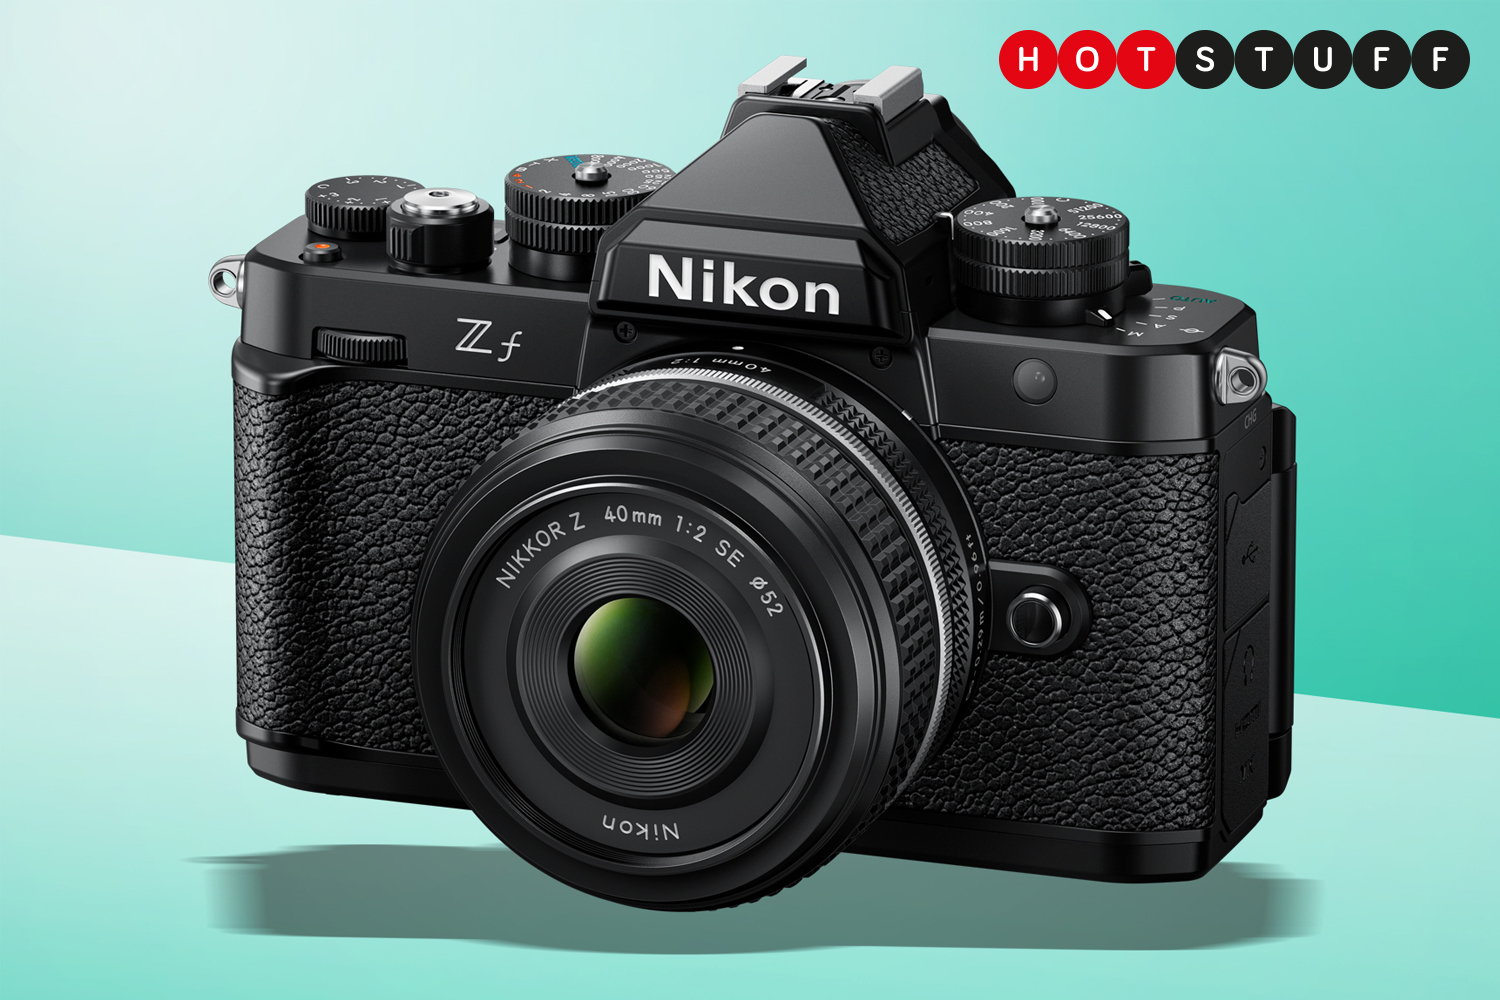 Nikon Zf - Full Frame Retro Camera is Even Better Than Expected